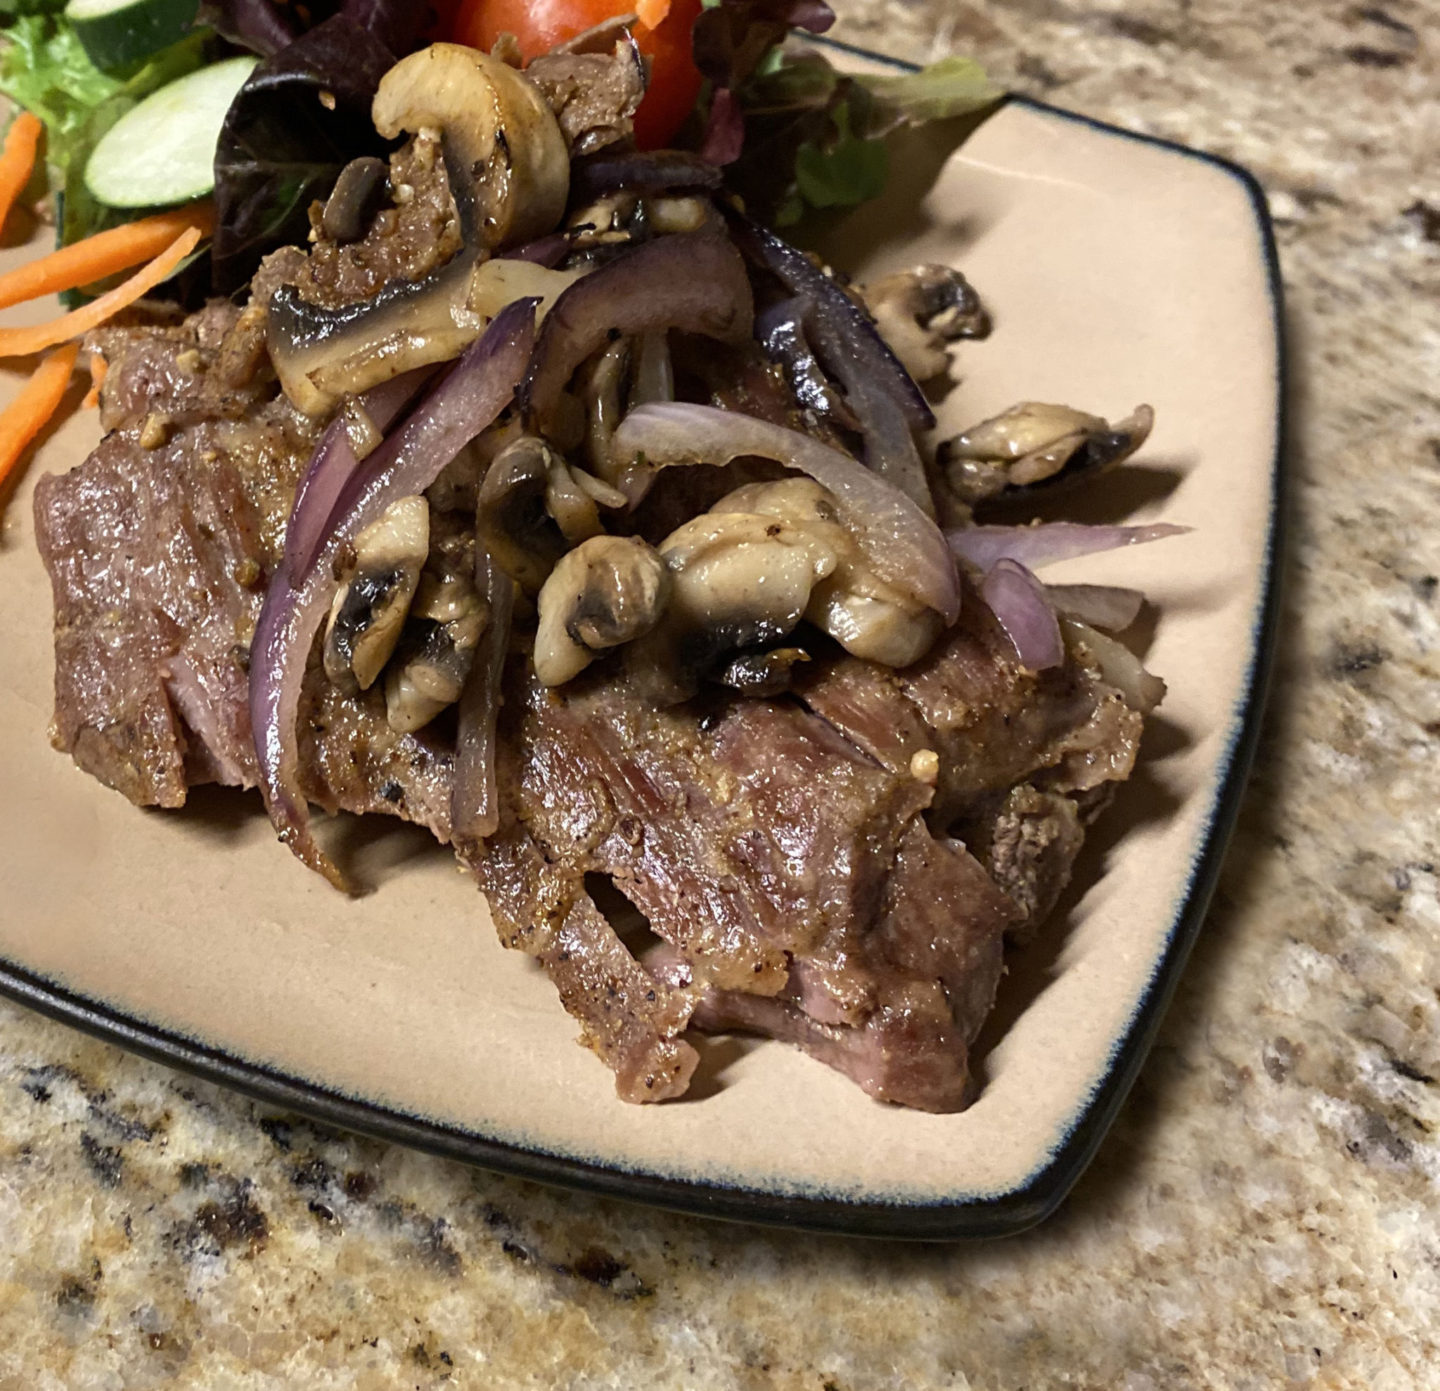 skirt steak with sauted mushrooms and onions